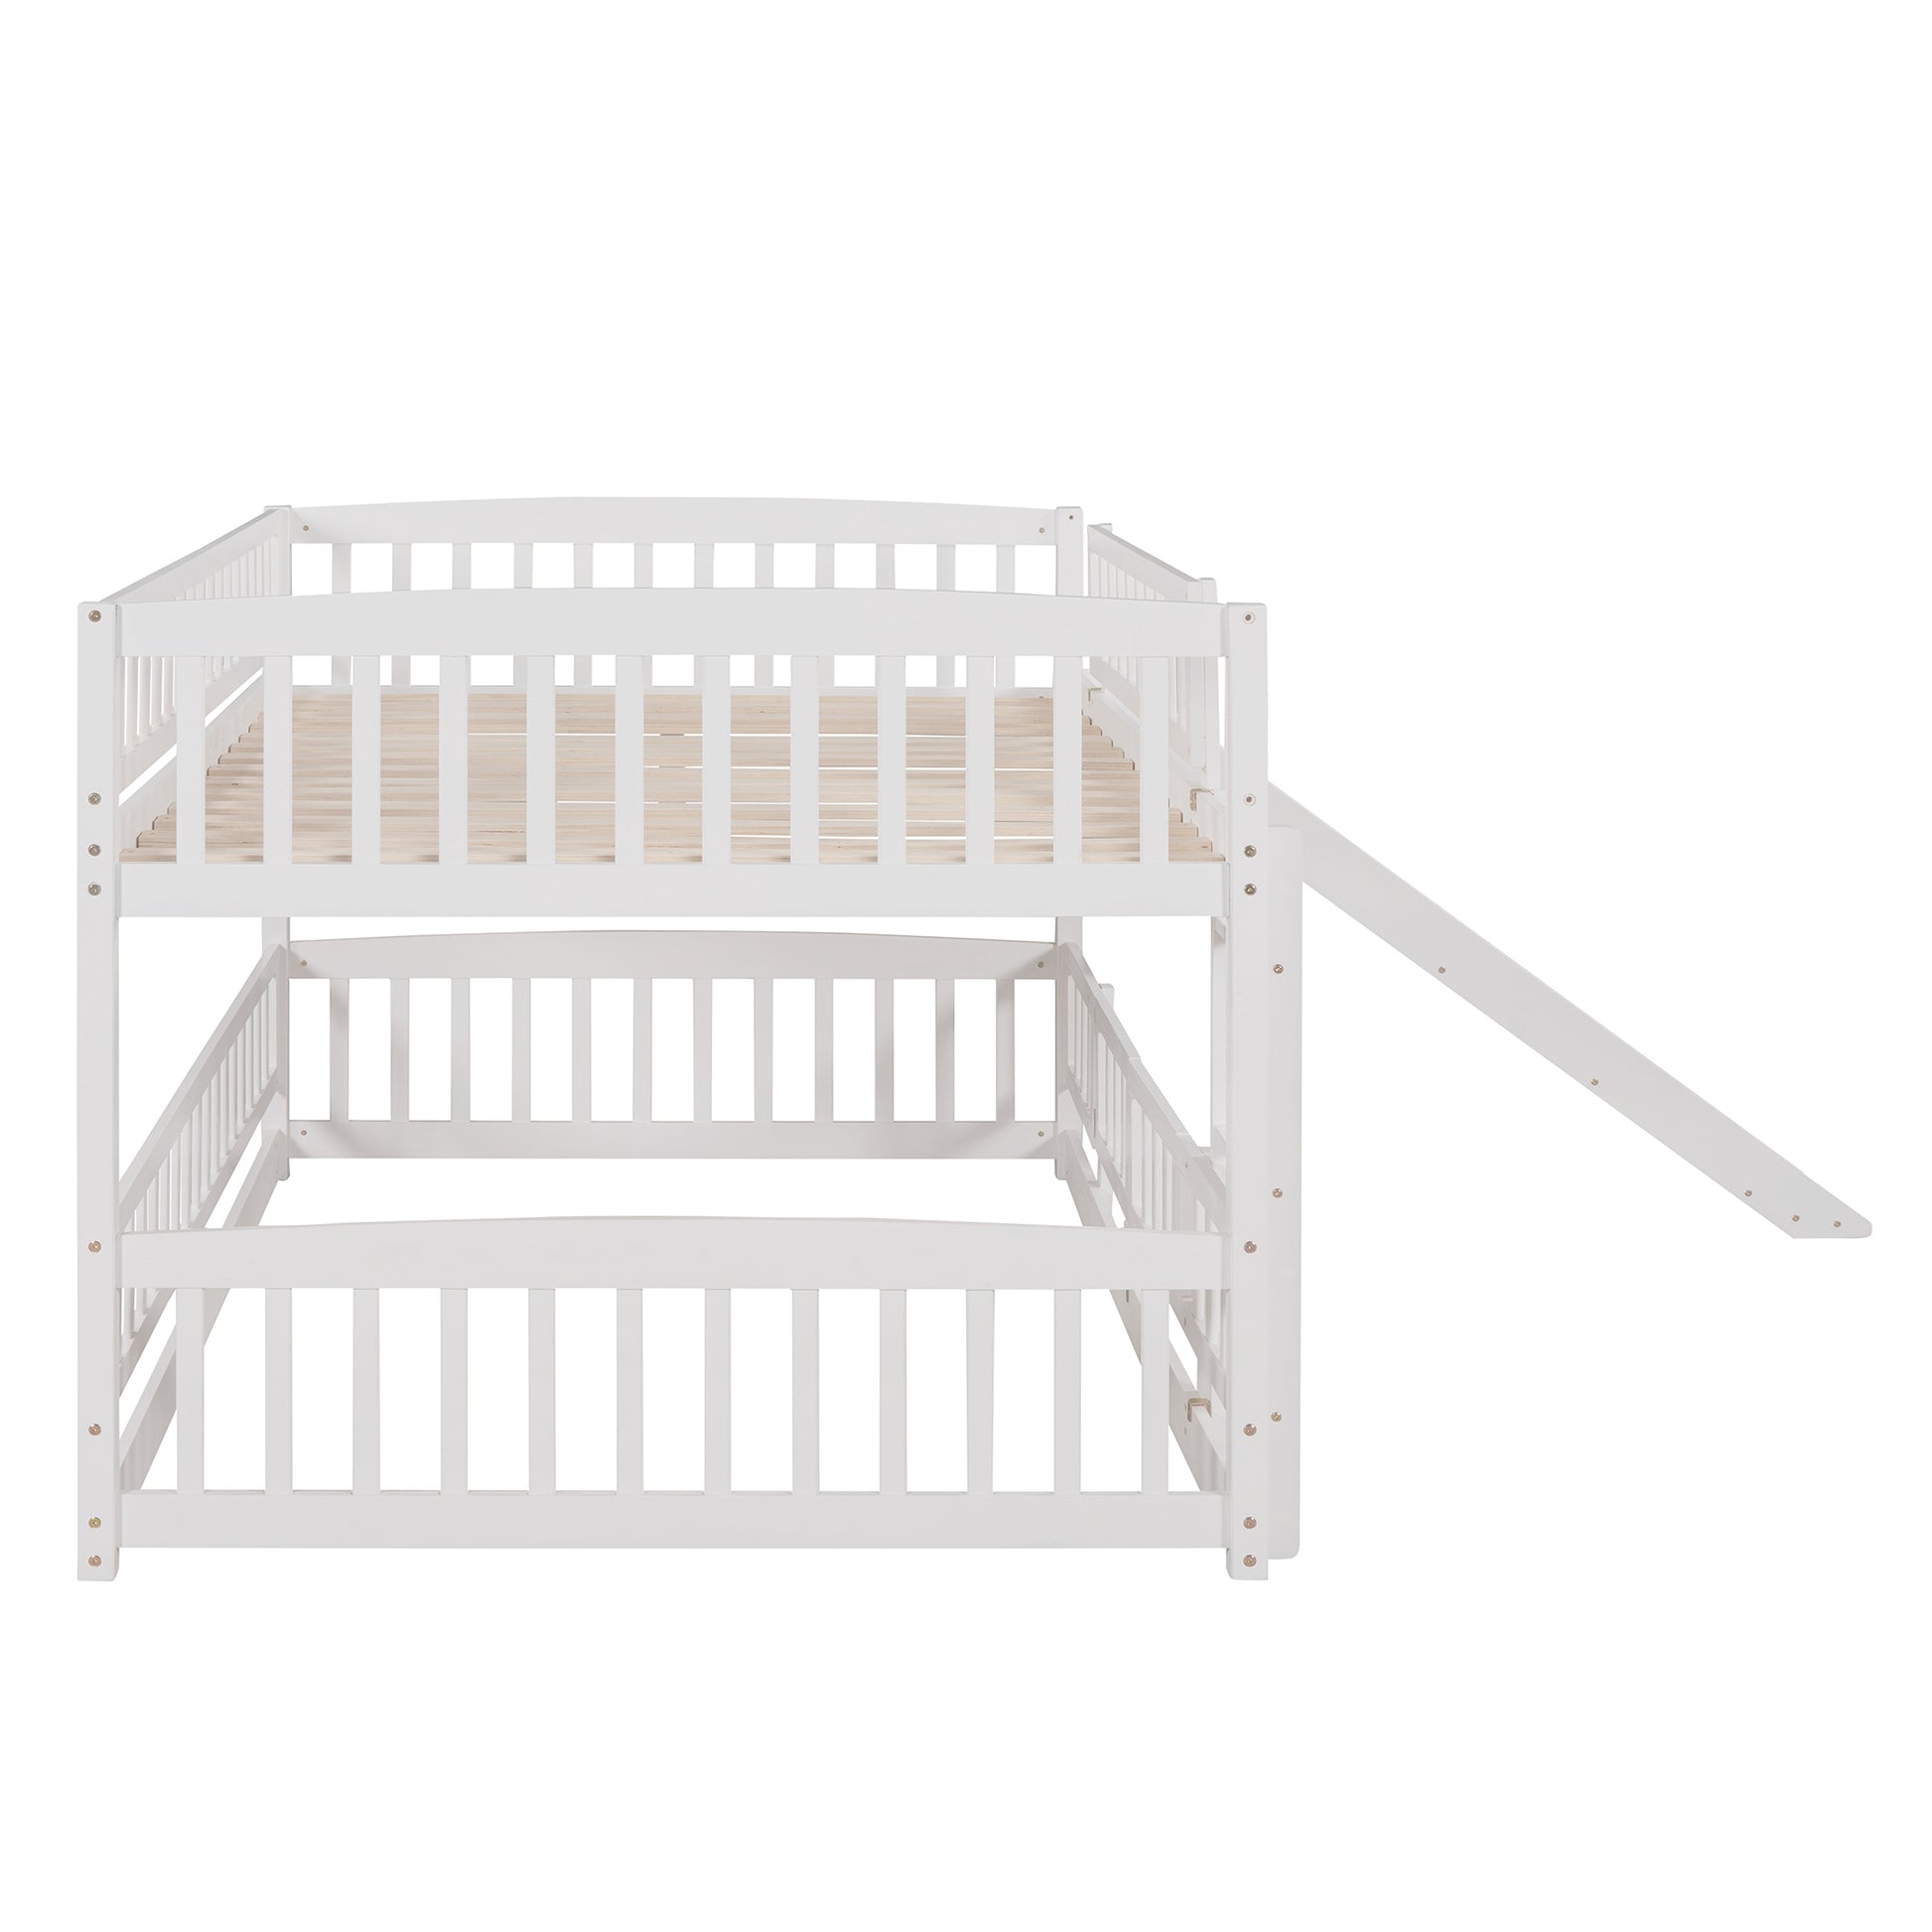 Bunk Bed with Slide,Full Over Full Low Bunk Bed with white-solid wood